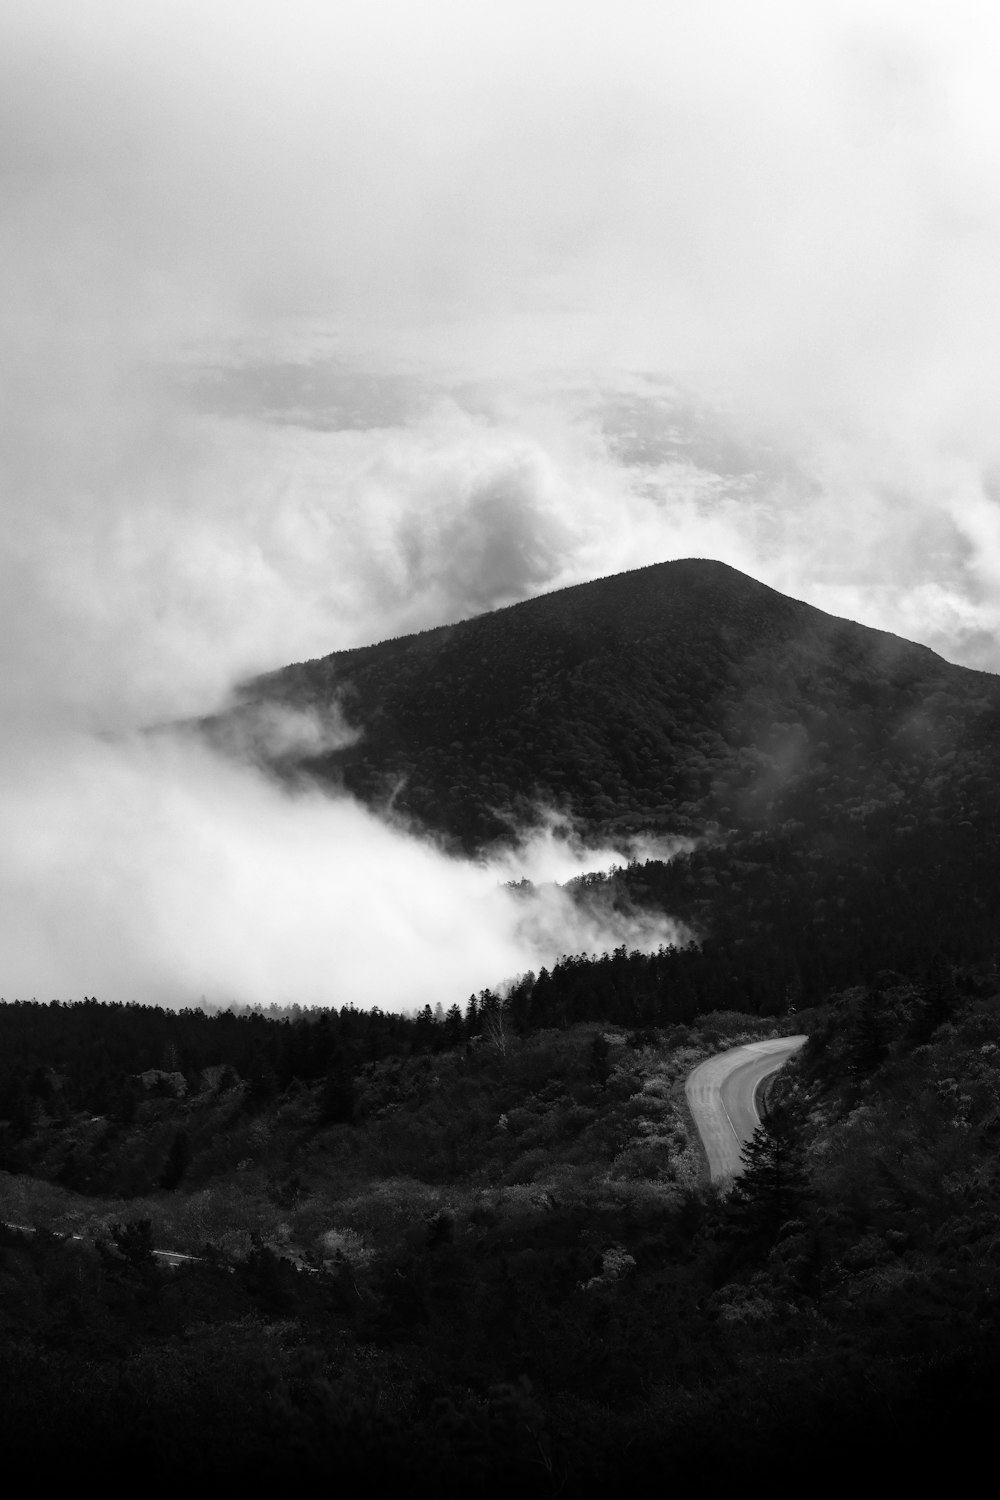 a black and white photo of a road in the mountains